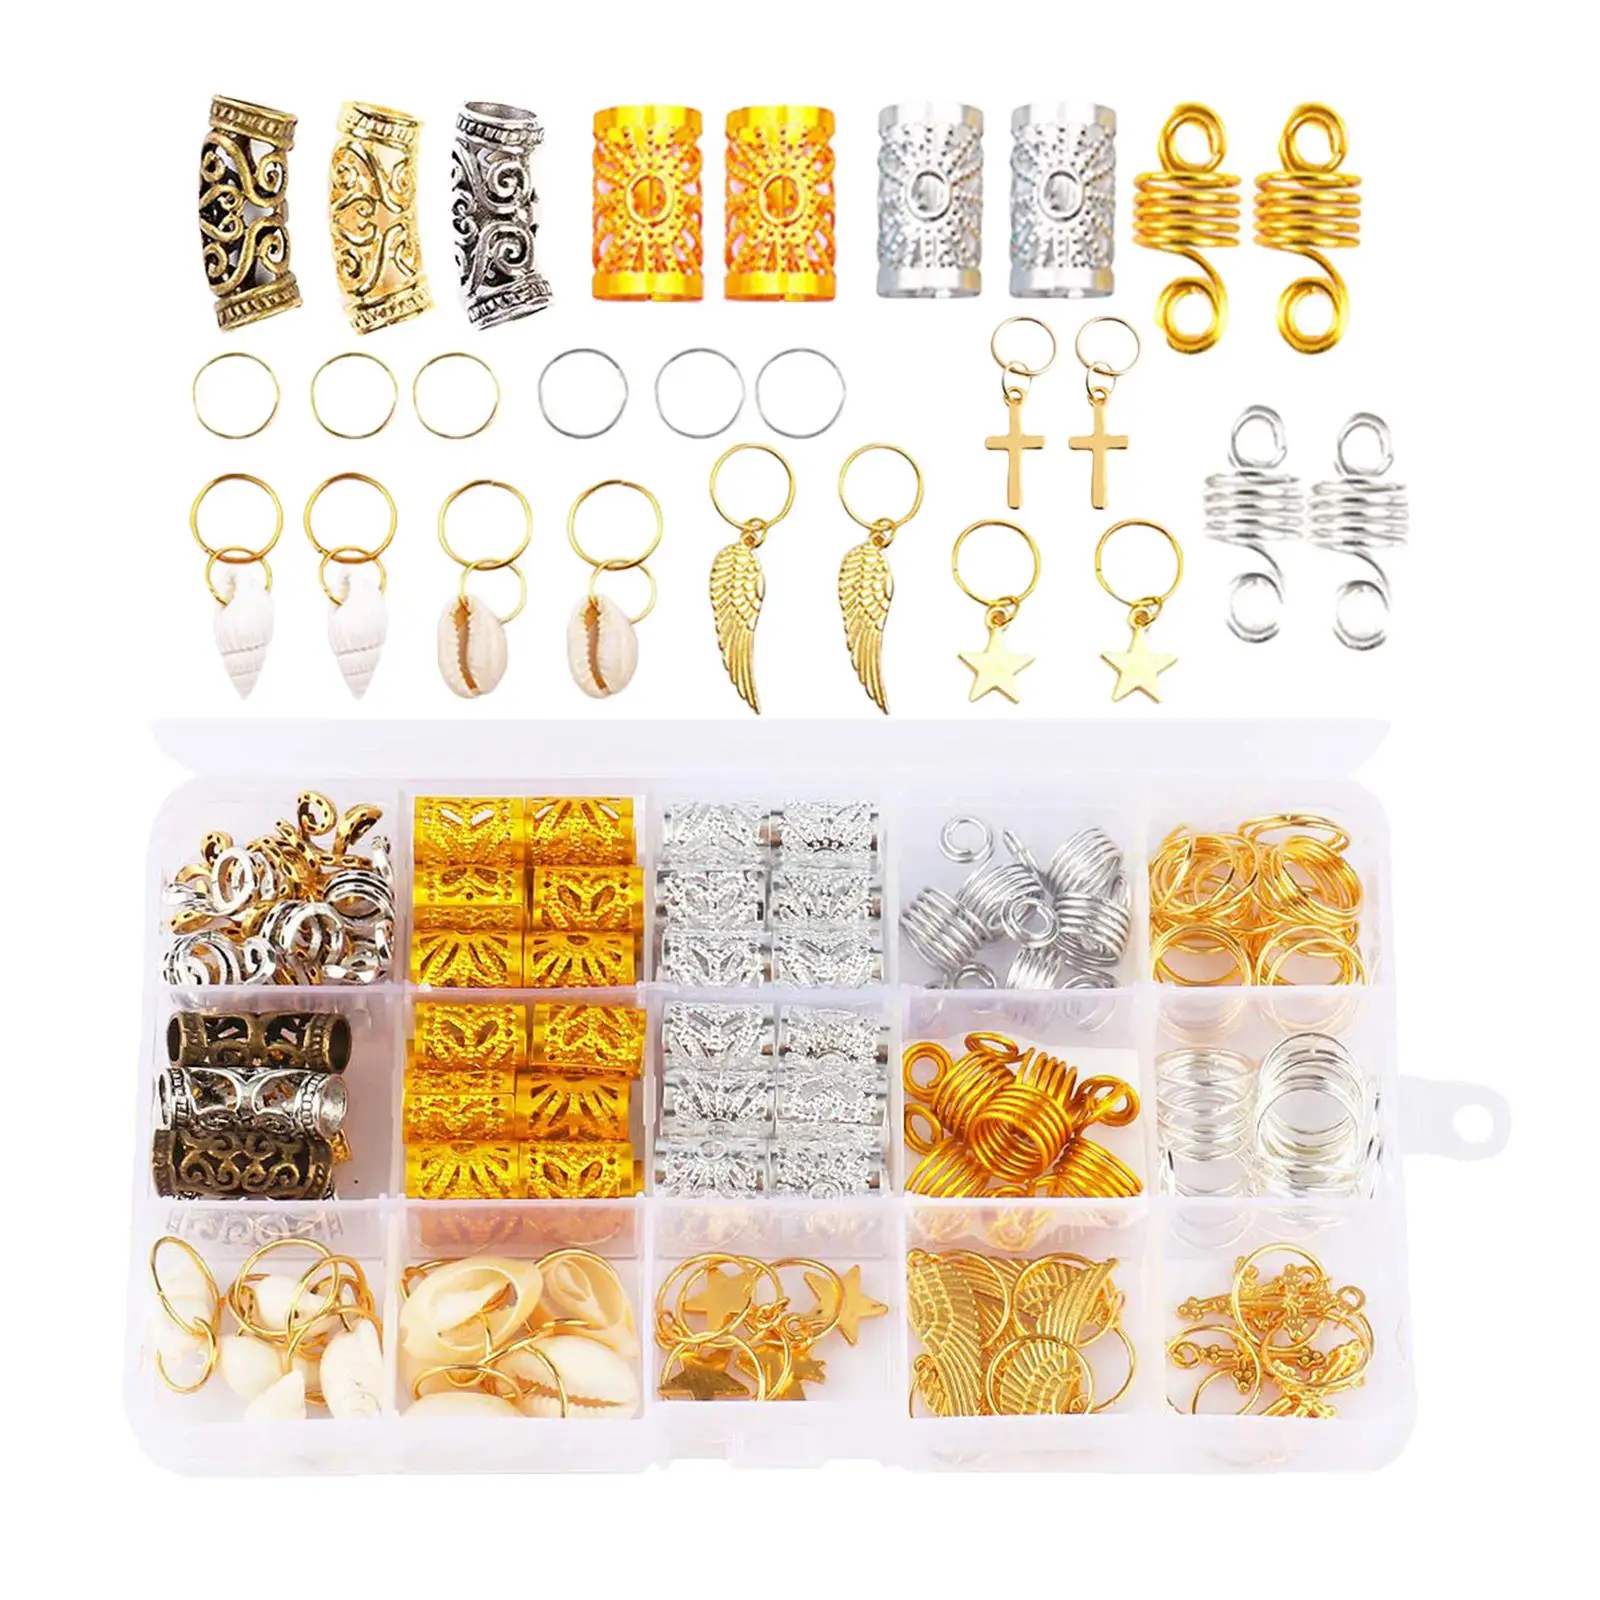 Alloy Hair Extension Clips Kit Beauty Supplies Spring Multicolor Pendant Set for Dreadlock Hair Styling Performance Party Women